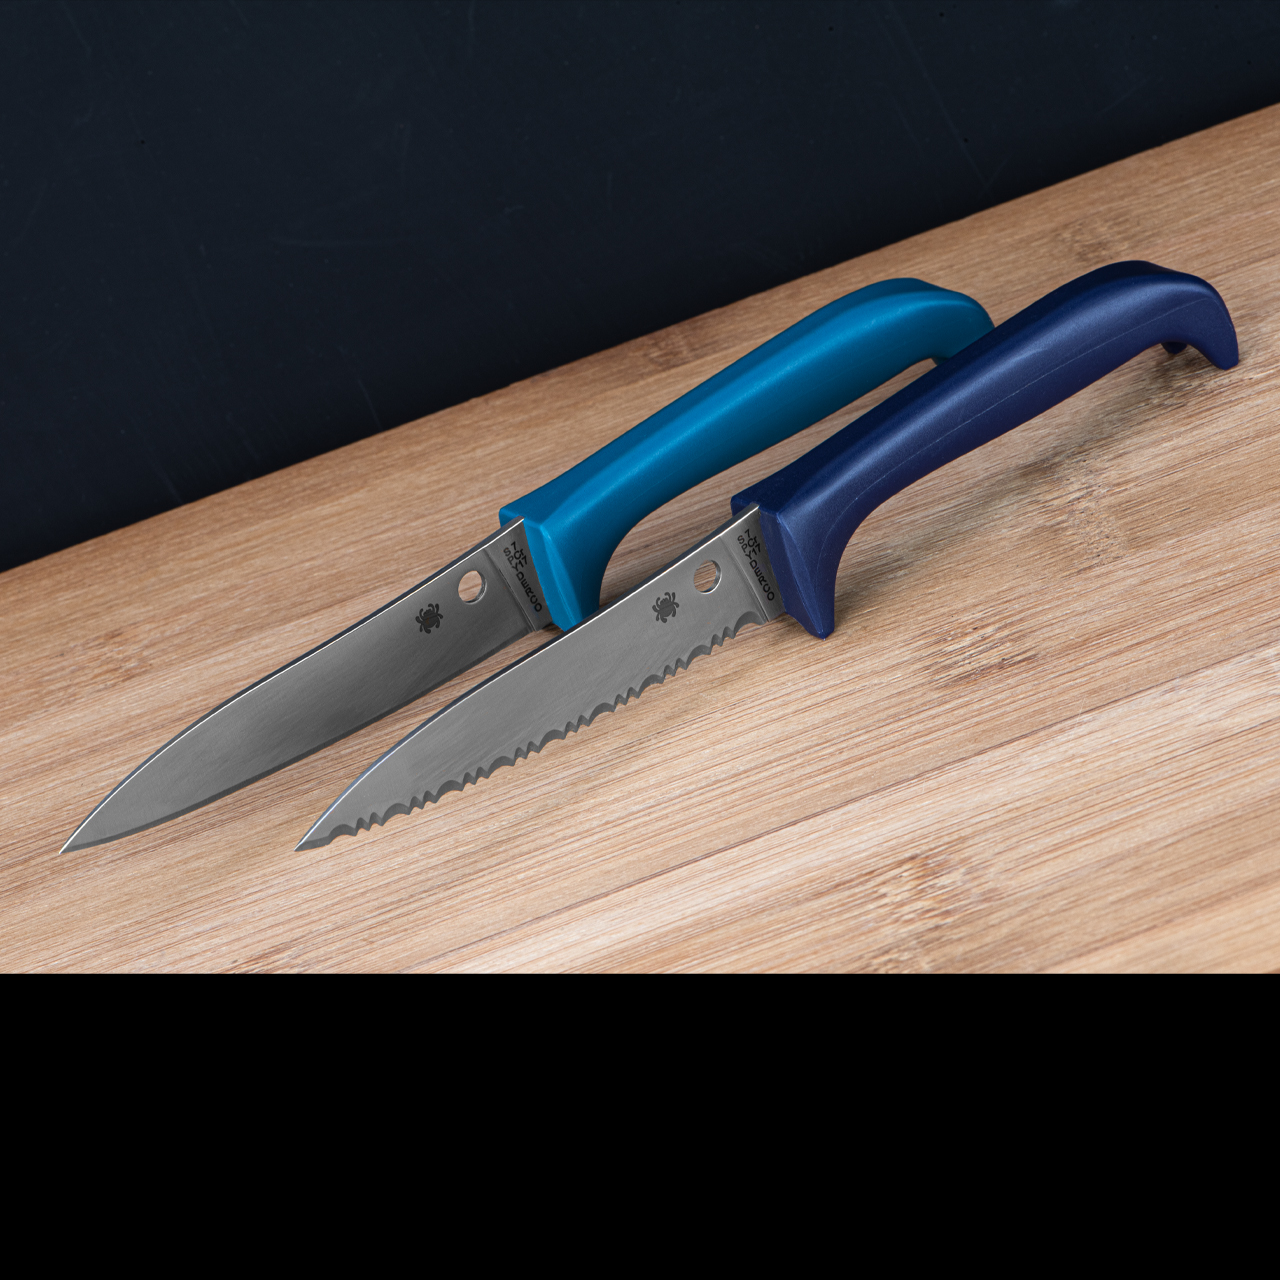 Spyderco Counter Puppy Kitchen Knife Blue Plastic Handle 7Cr17